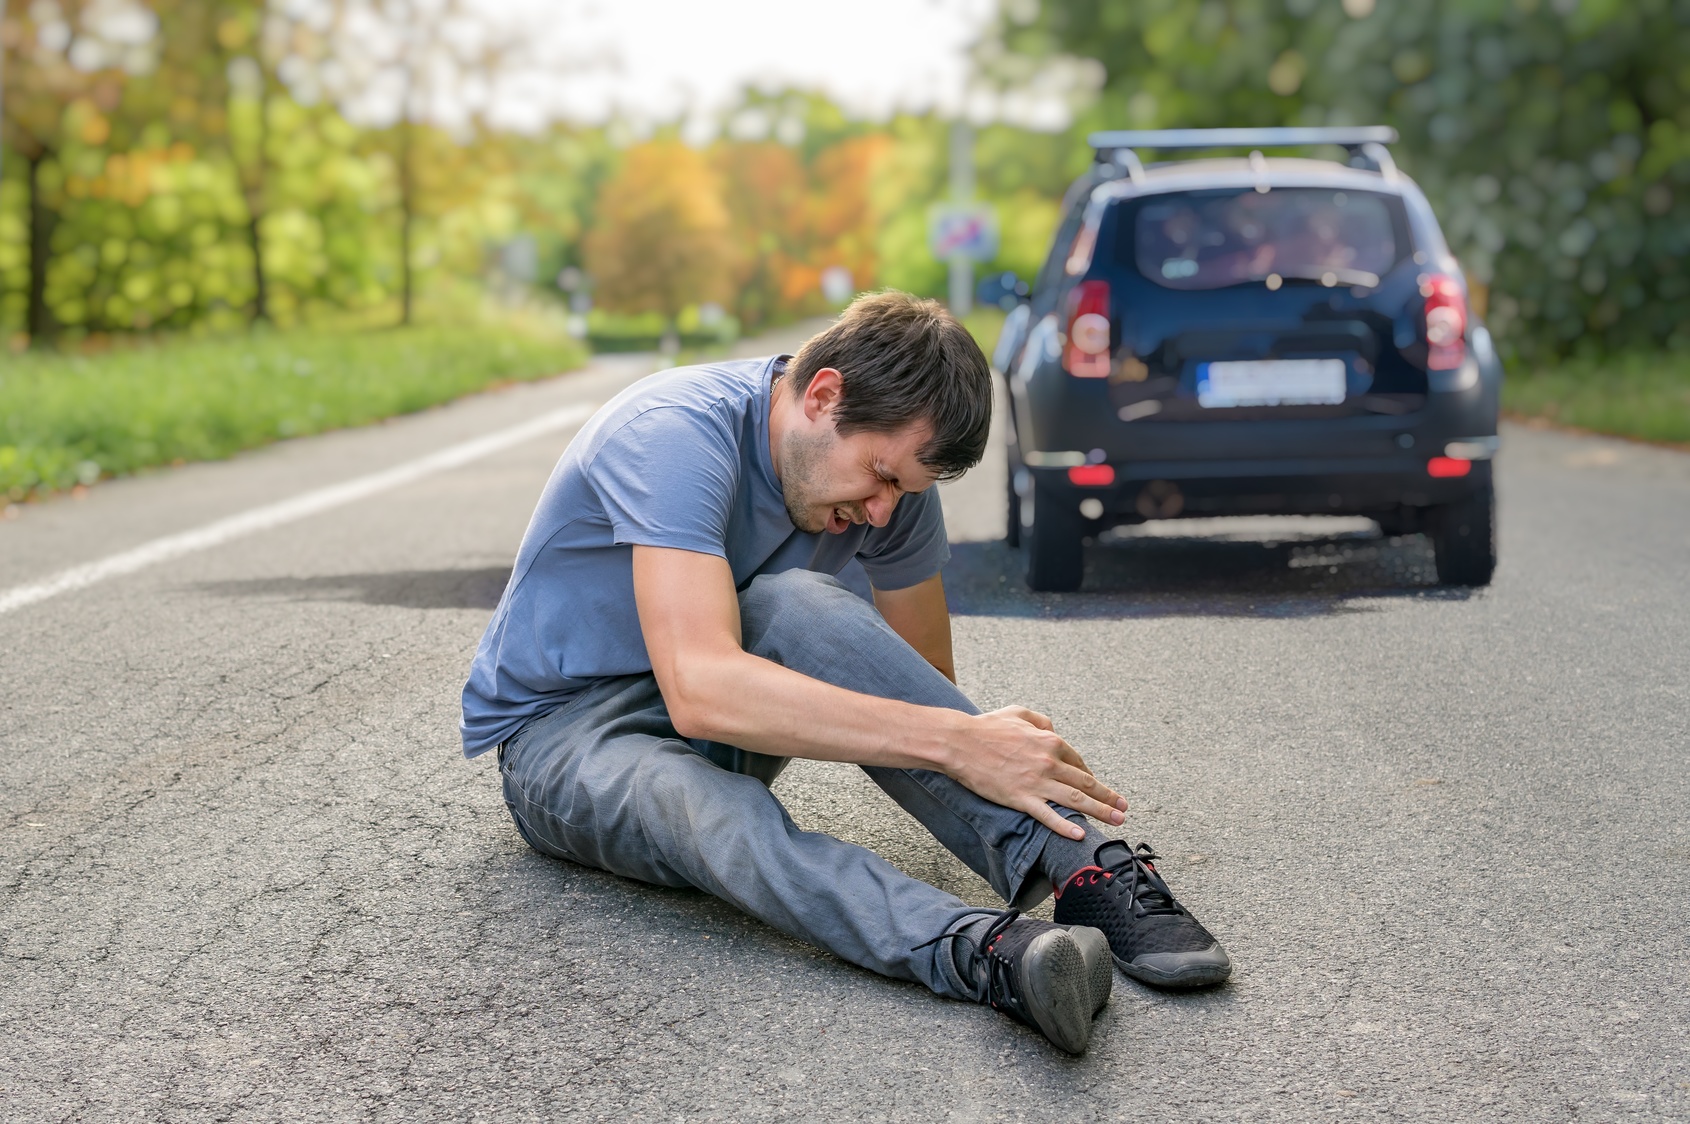 Garland Pedestrian Accident Lawyers | Dallas Car Accident Lawyers